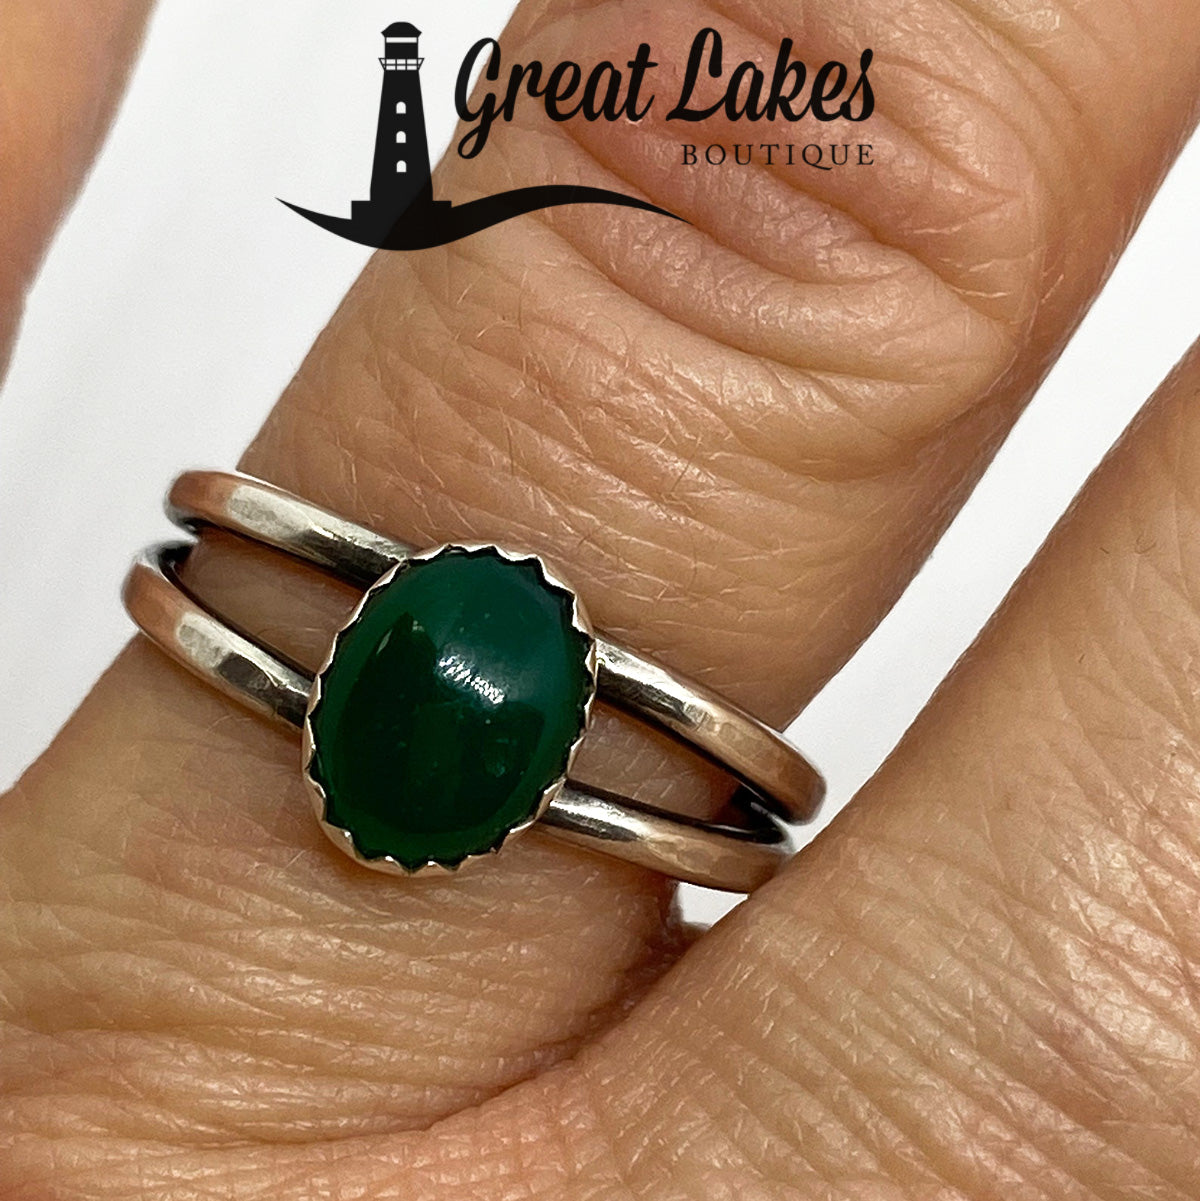 Great Lakes Boutique Silver &amp; Green Onyx Ring